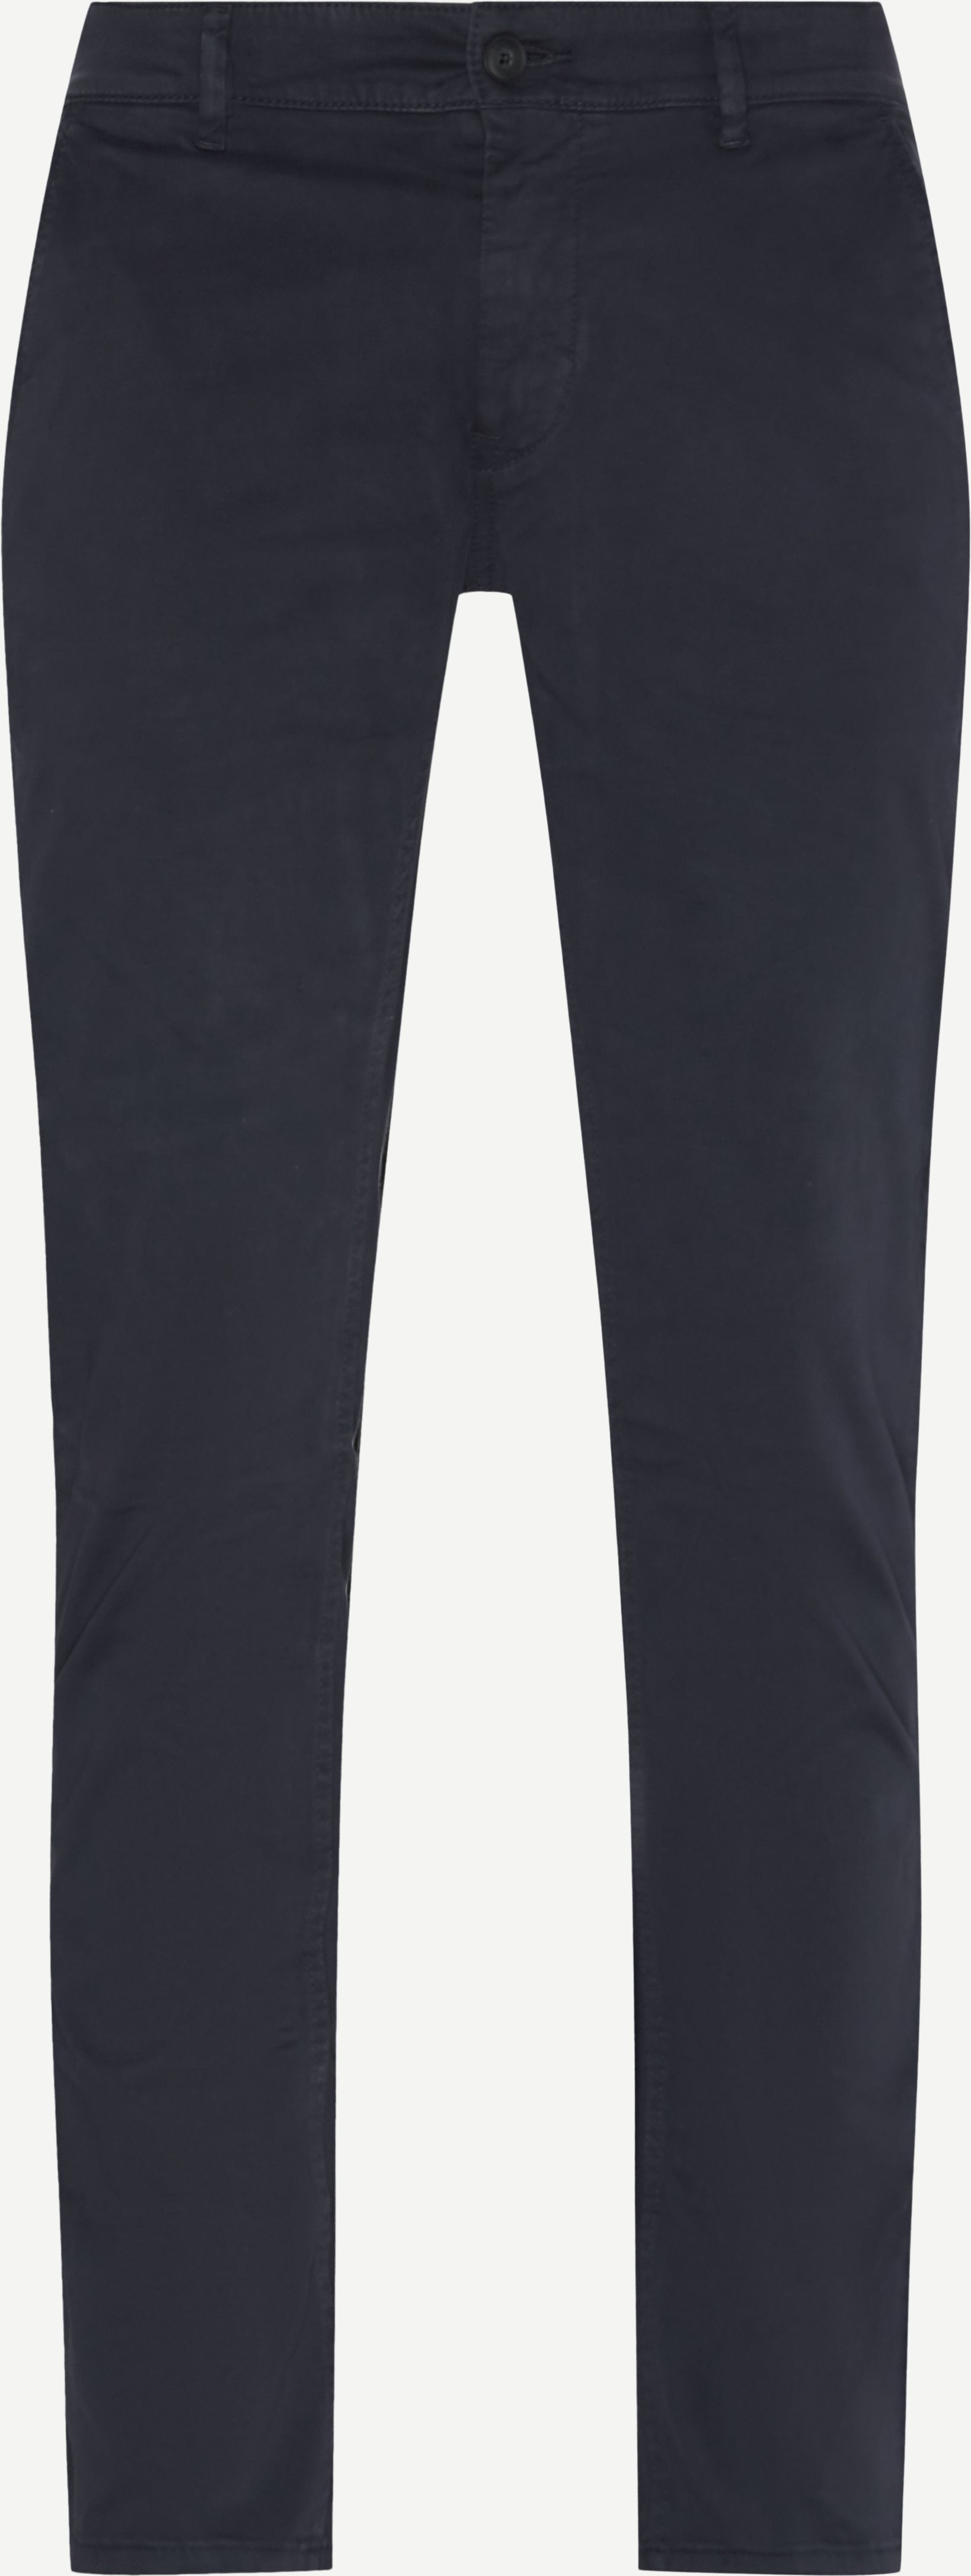 Schino Chinos - Trousers - Slim fit - Blue